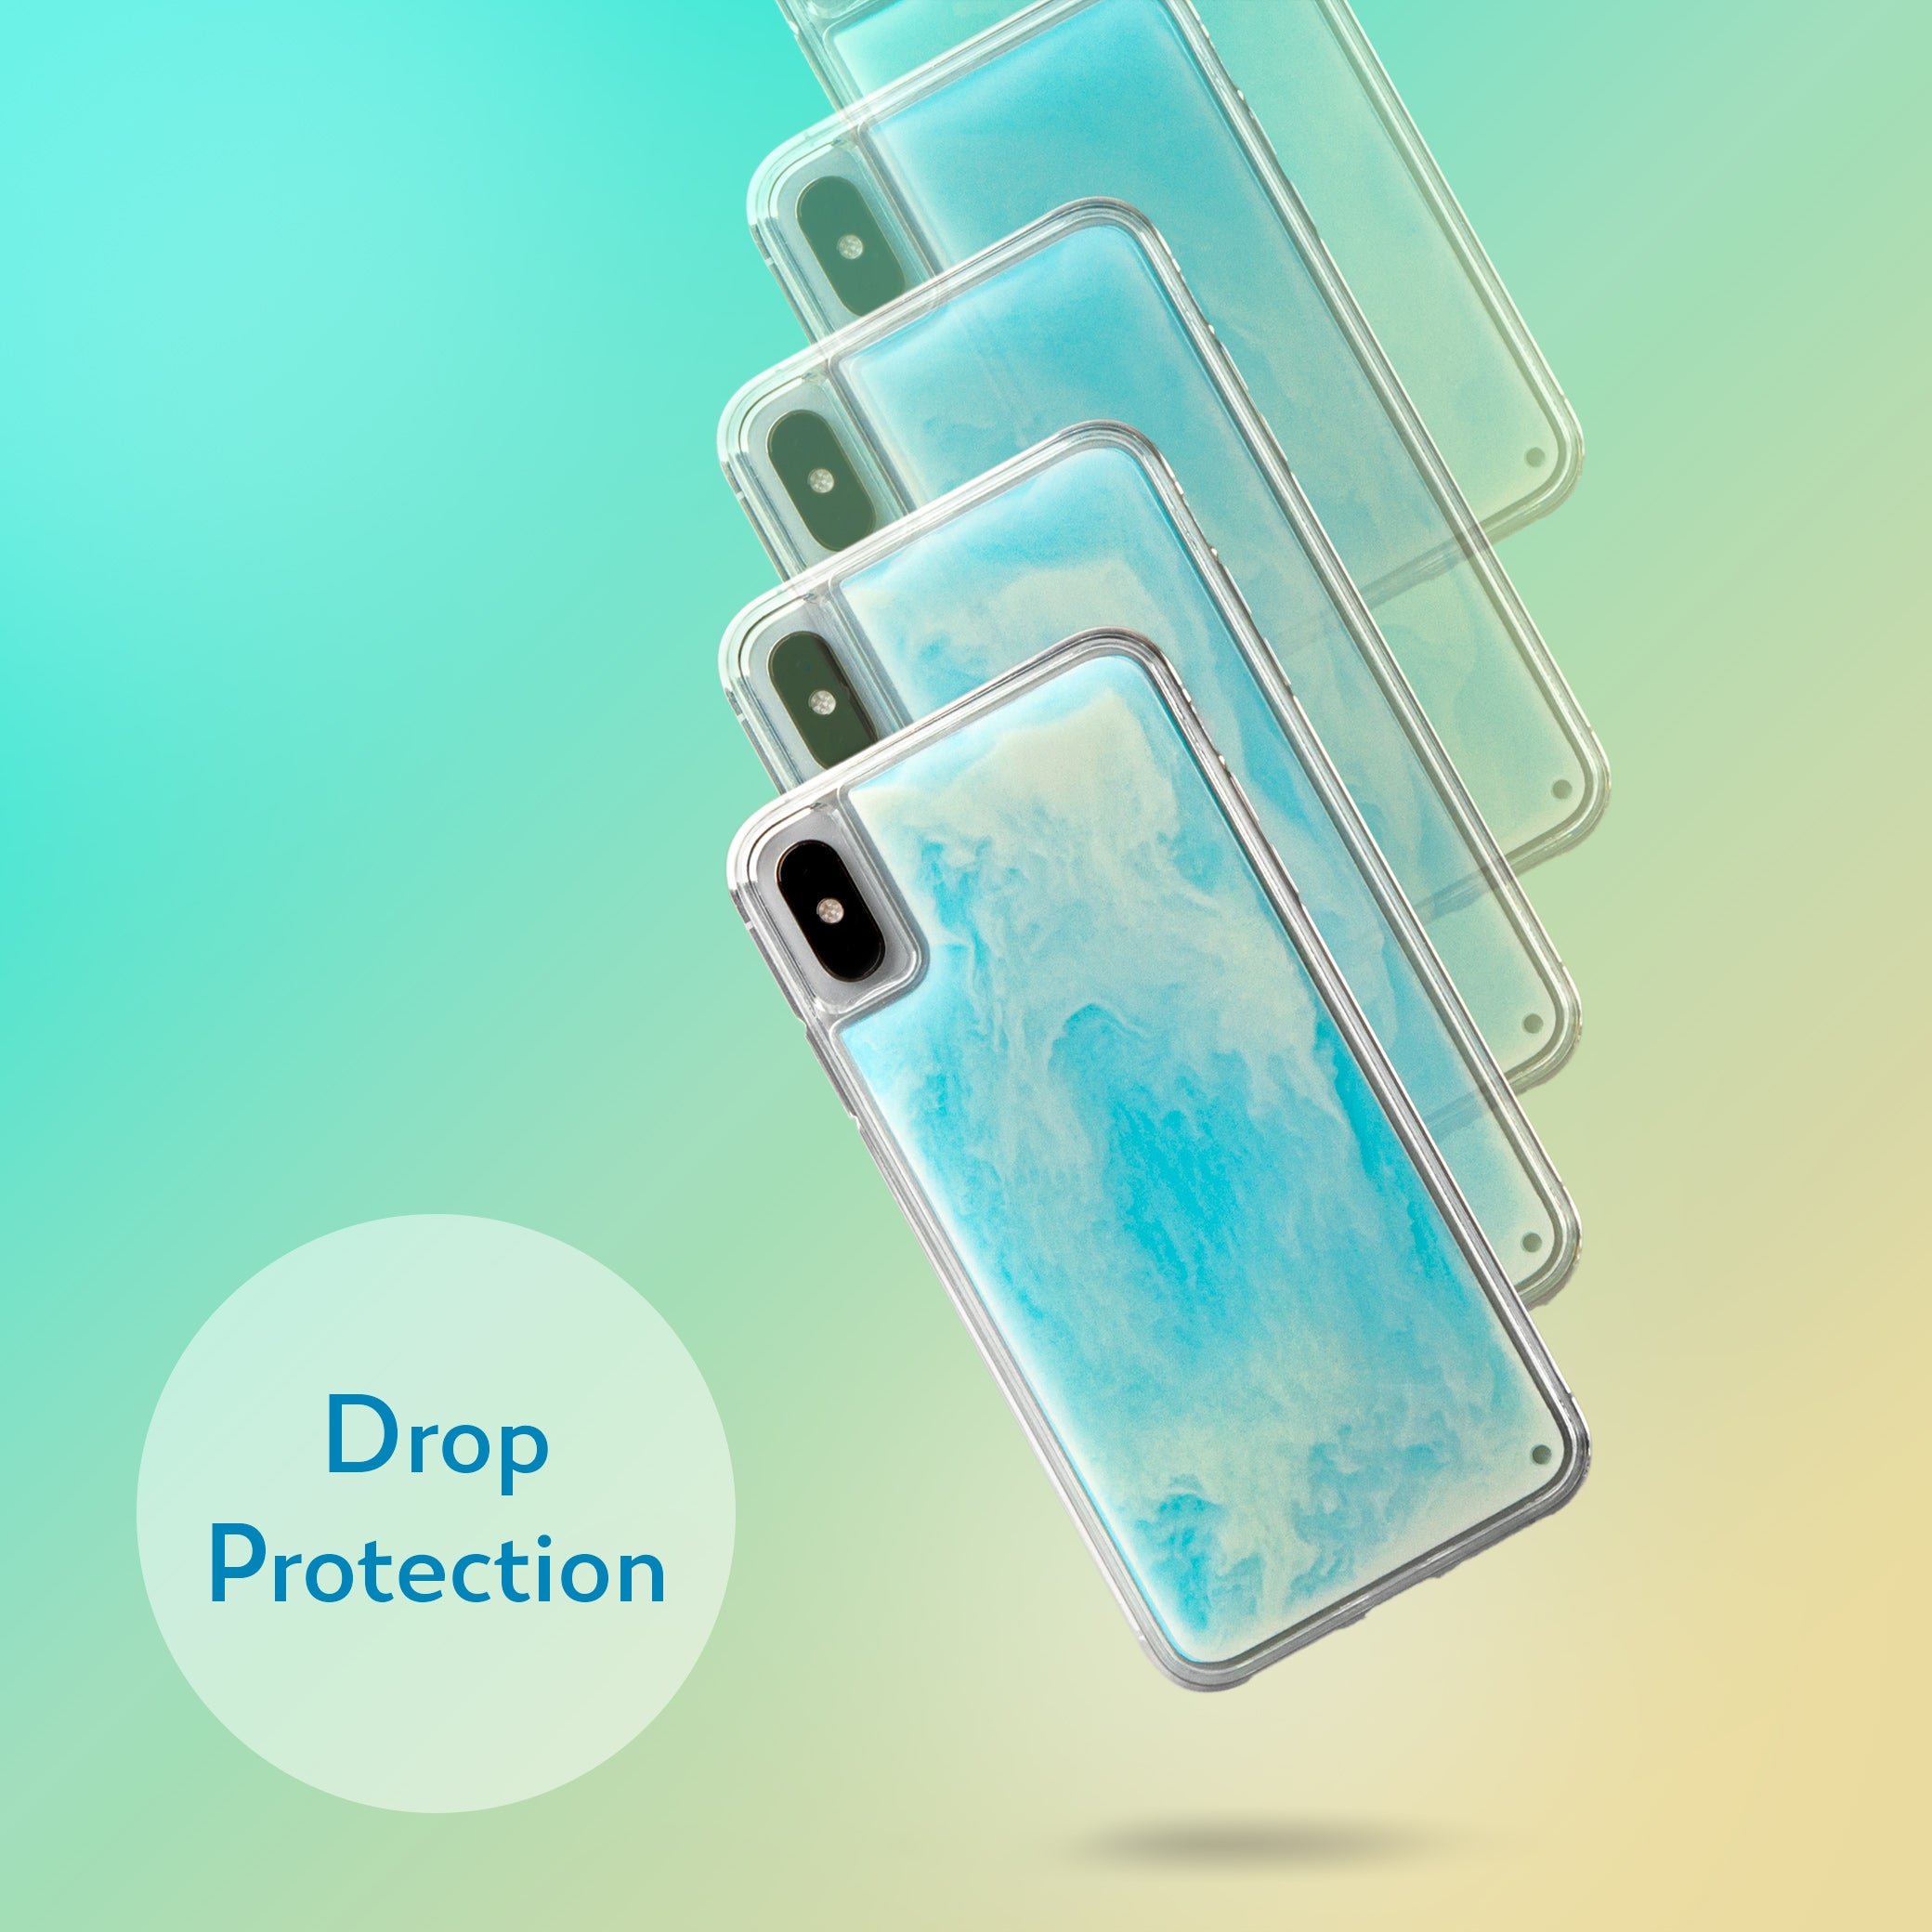 Neon Sand iPhone Xs Max Case - Ocean and Beach